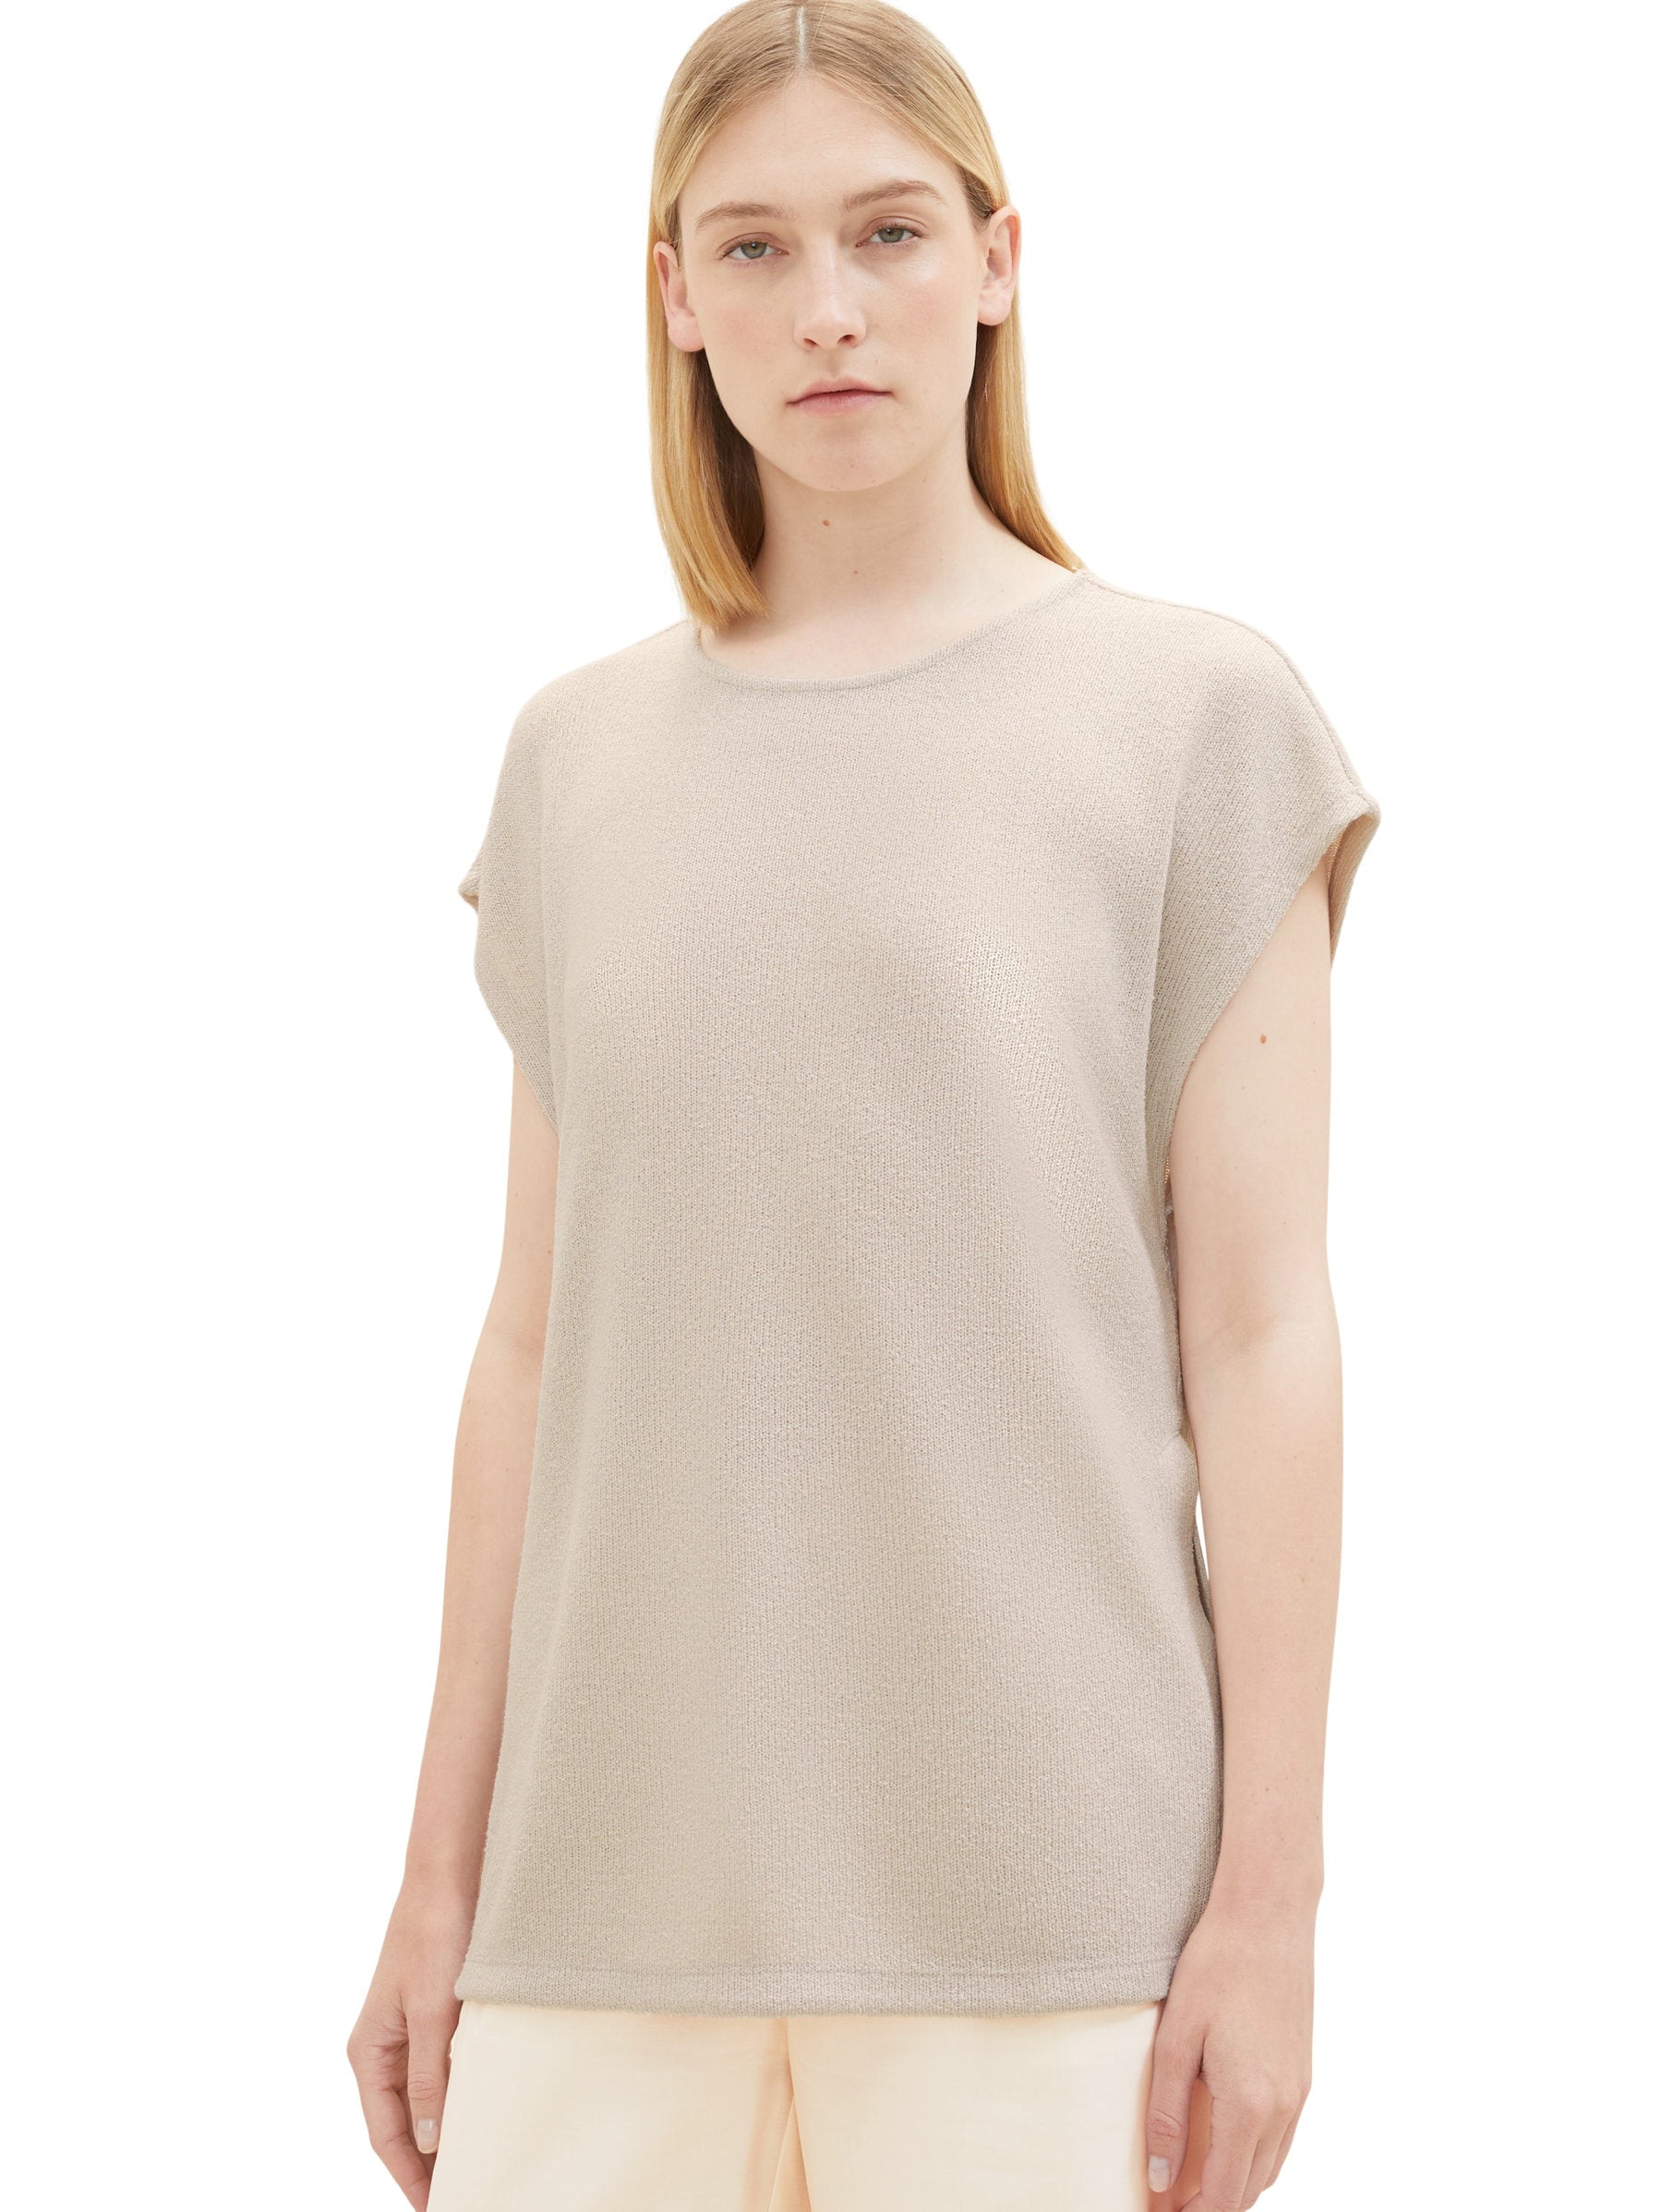 Blouse With Cap Sleeve_1038726_16339_06